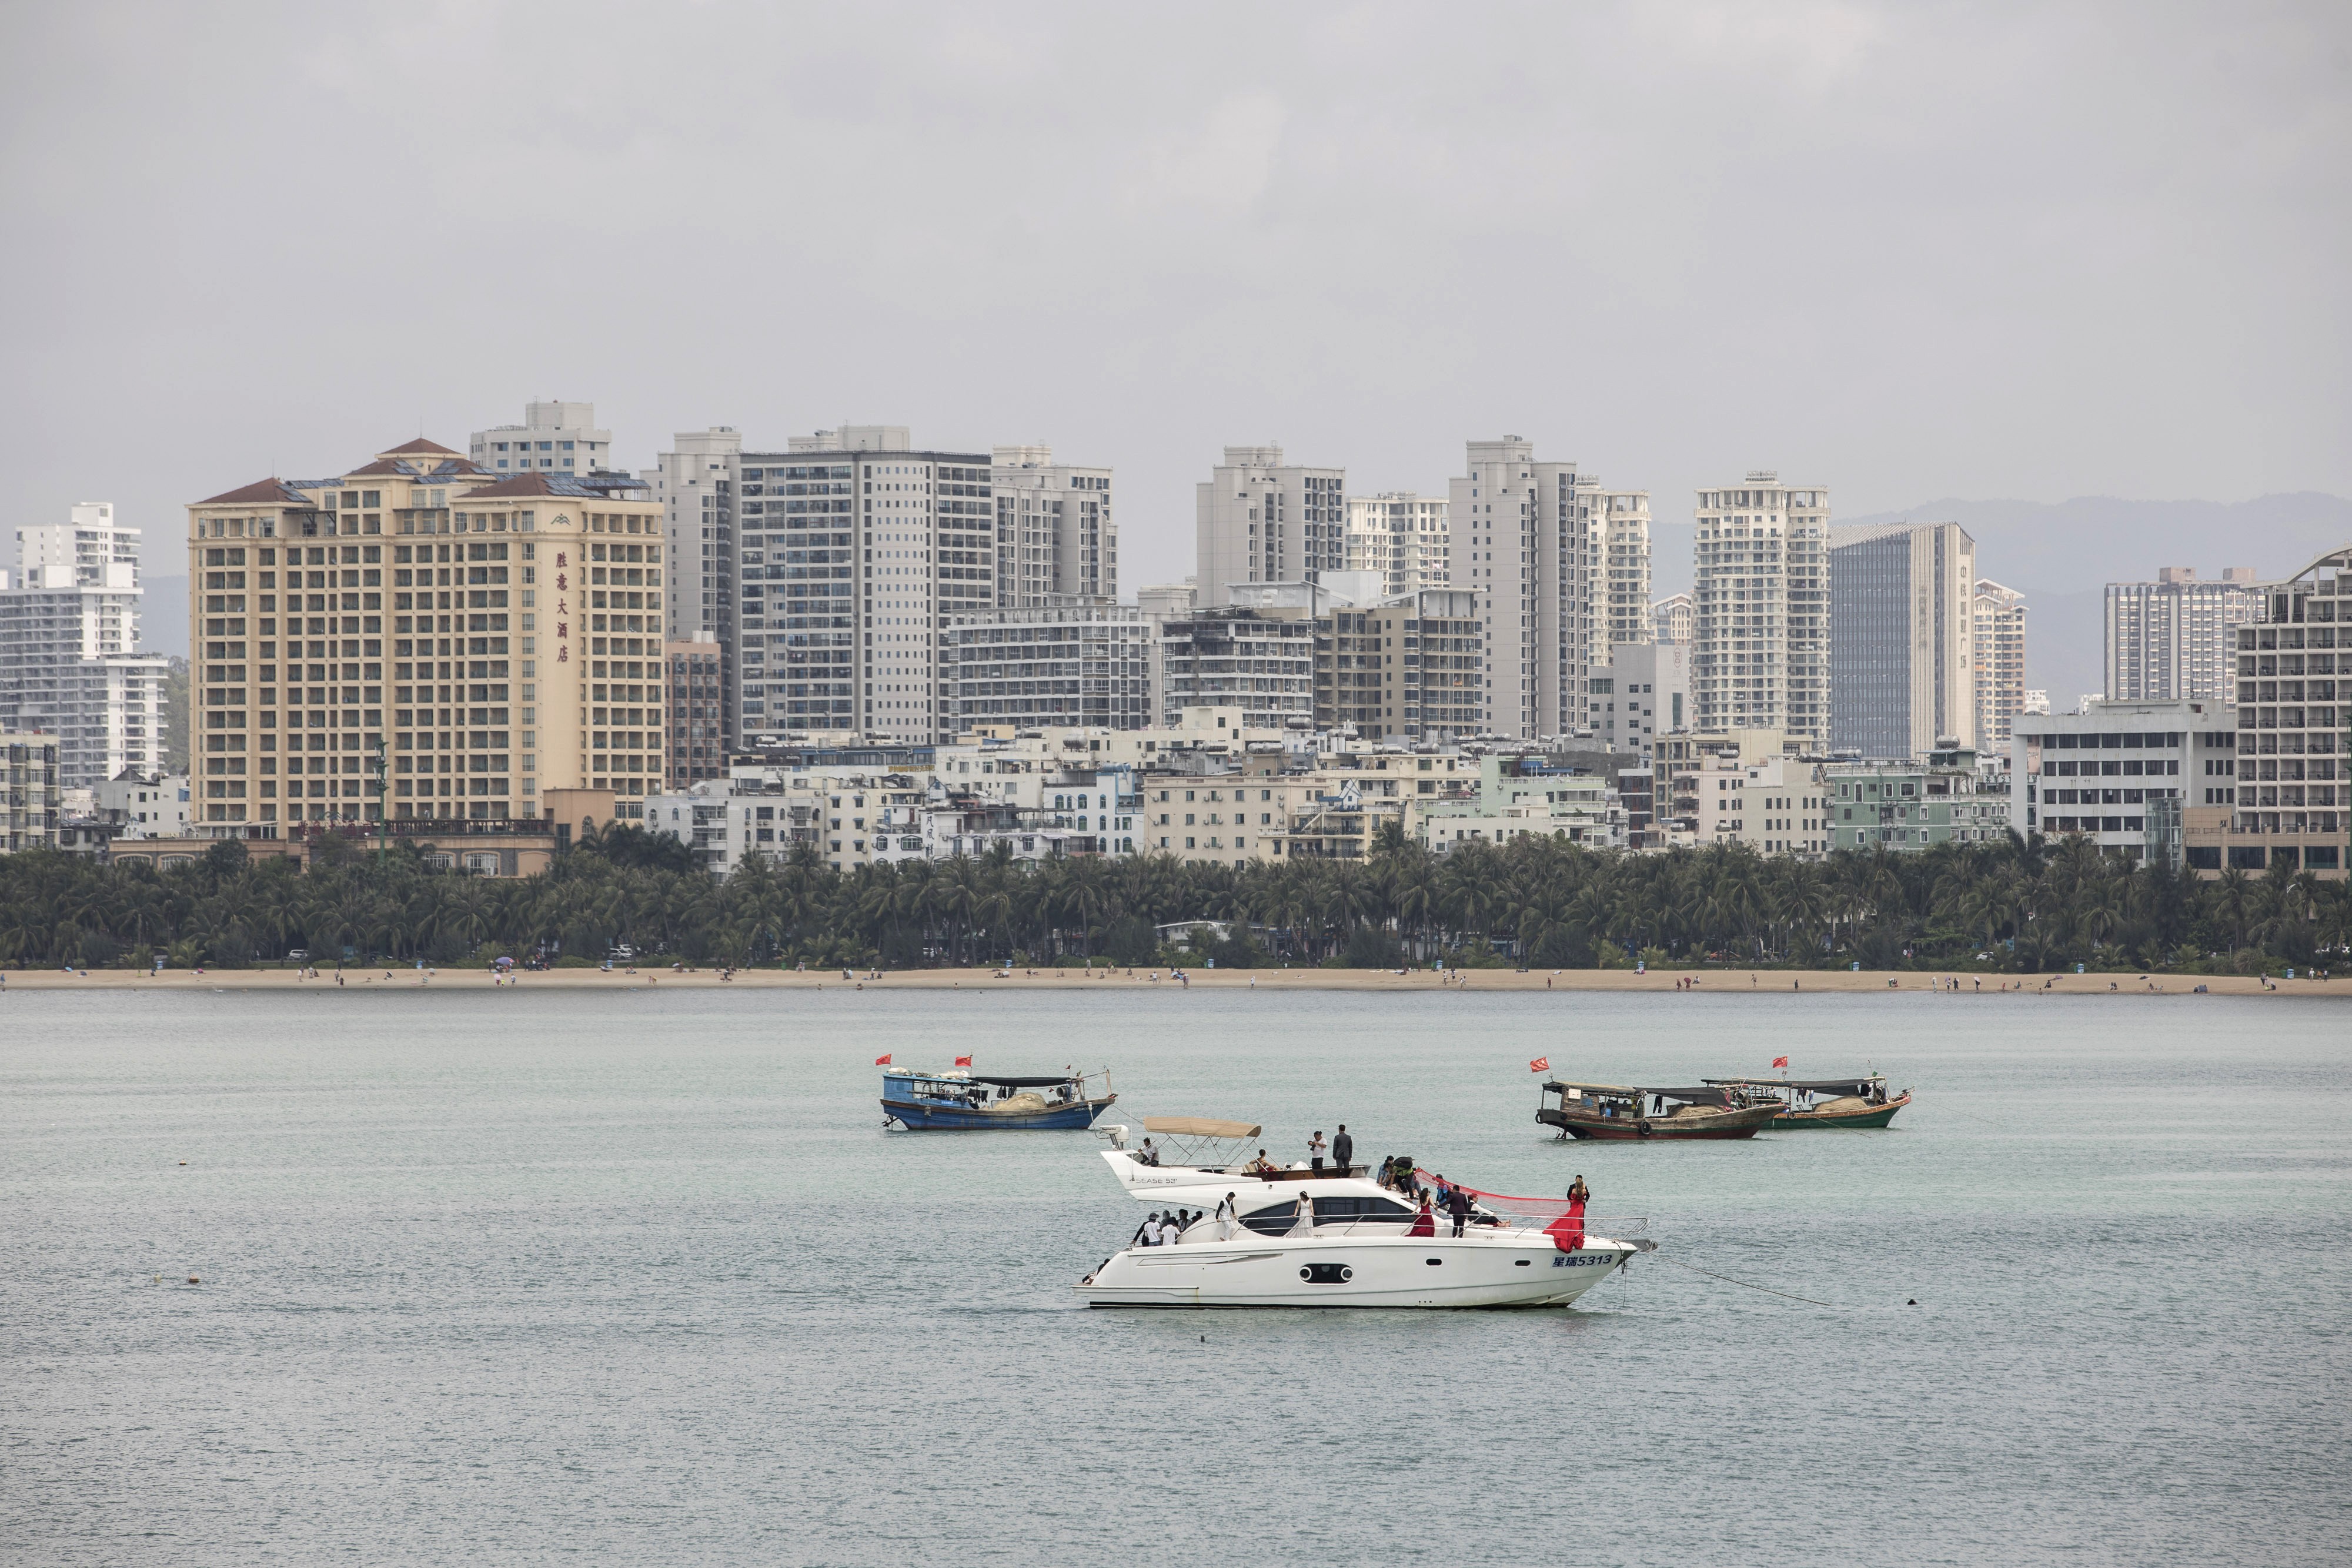 Authorities said applications for work visas for foreigners interested in making a temporary move to Hainan would generally be completed within two days